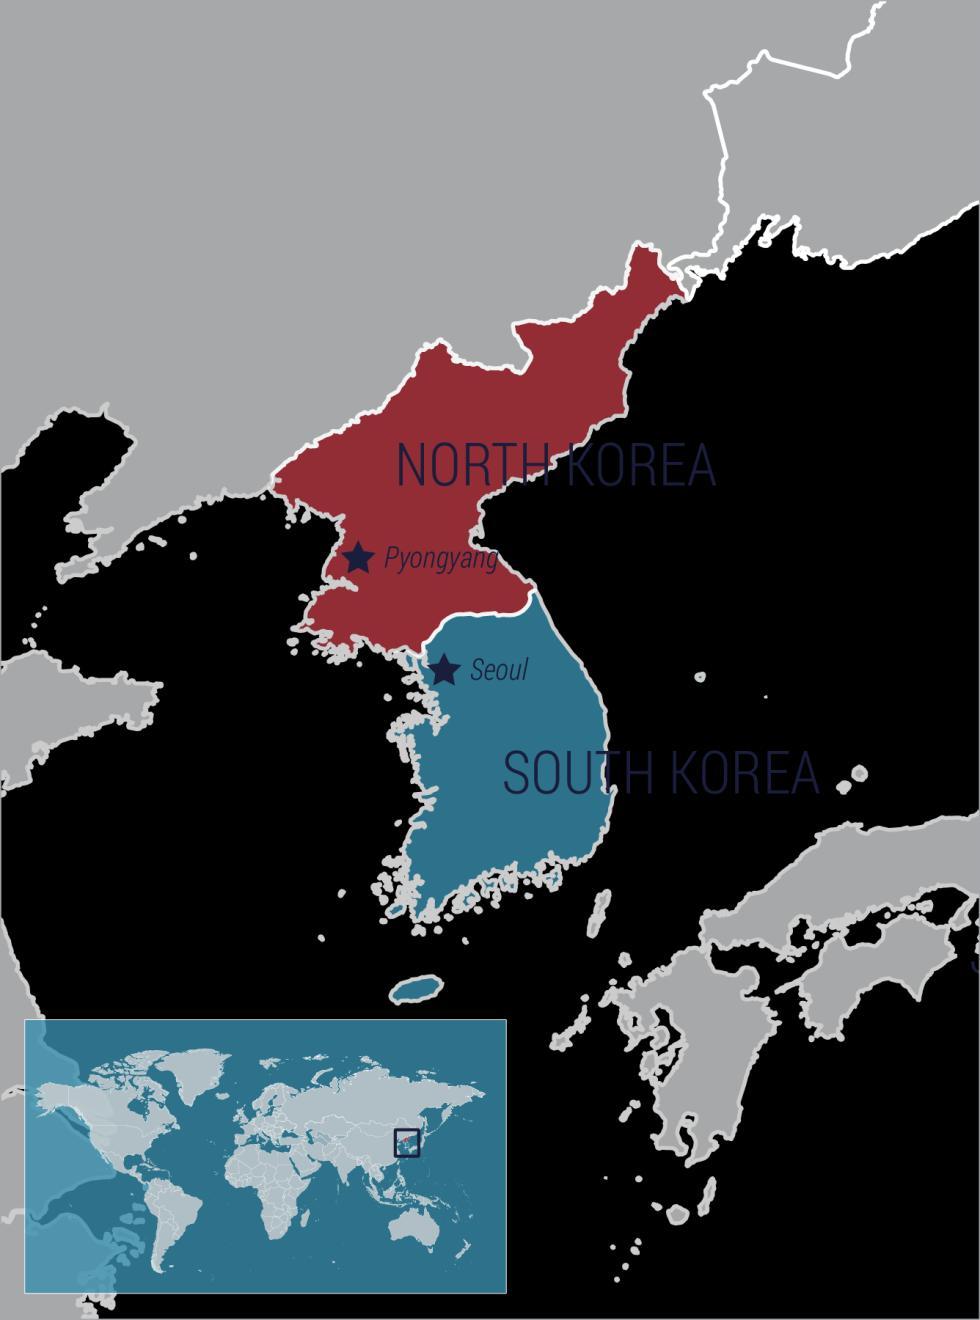 SIMULATION BACKGROUND North Korea remains the last truly totalitarian regime and closed state on earth.